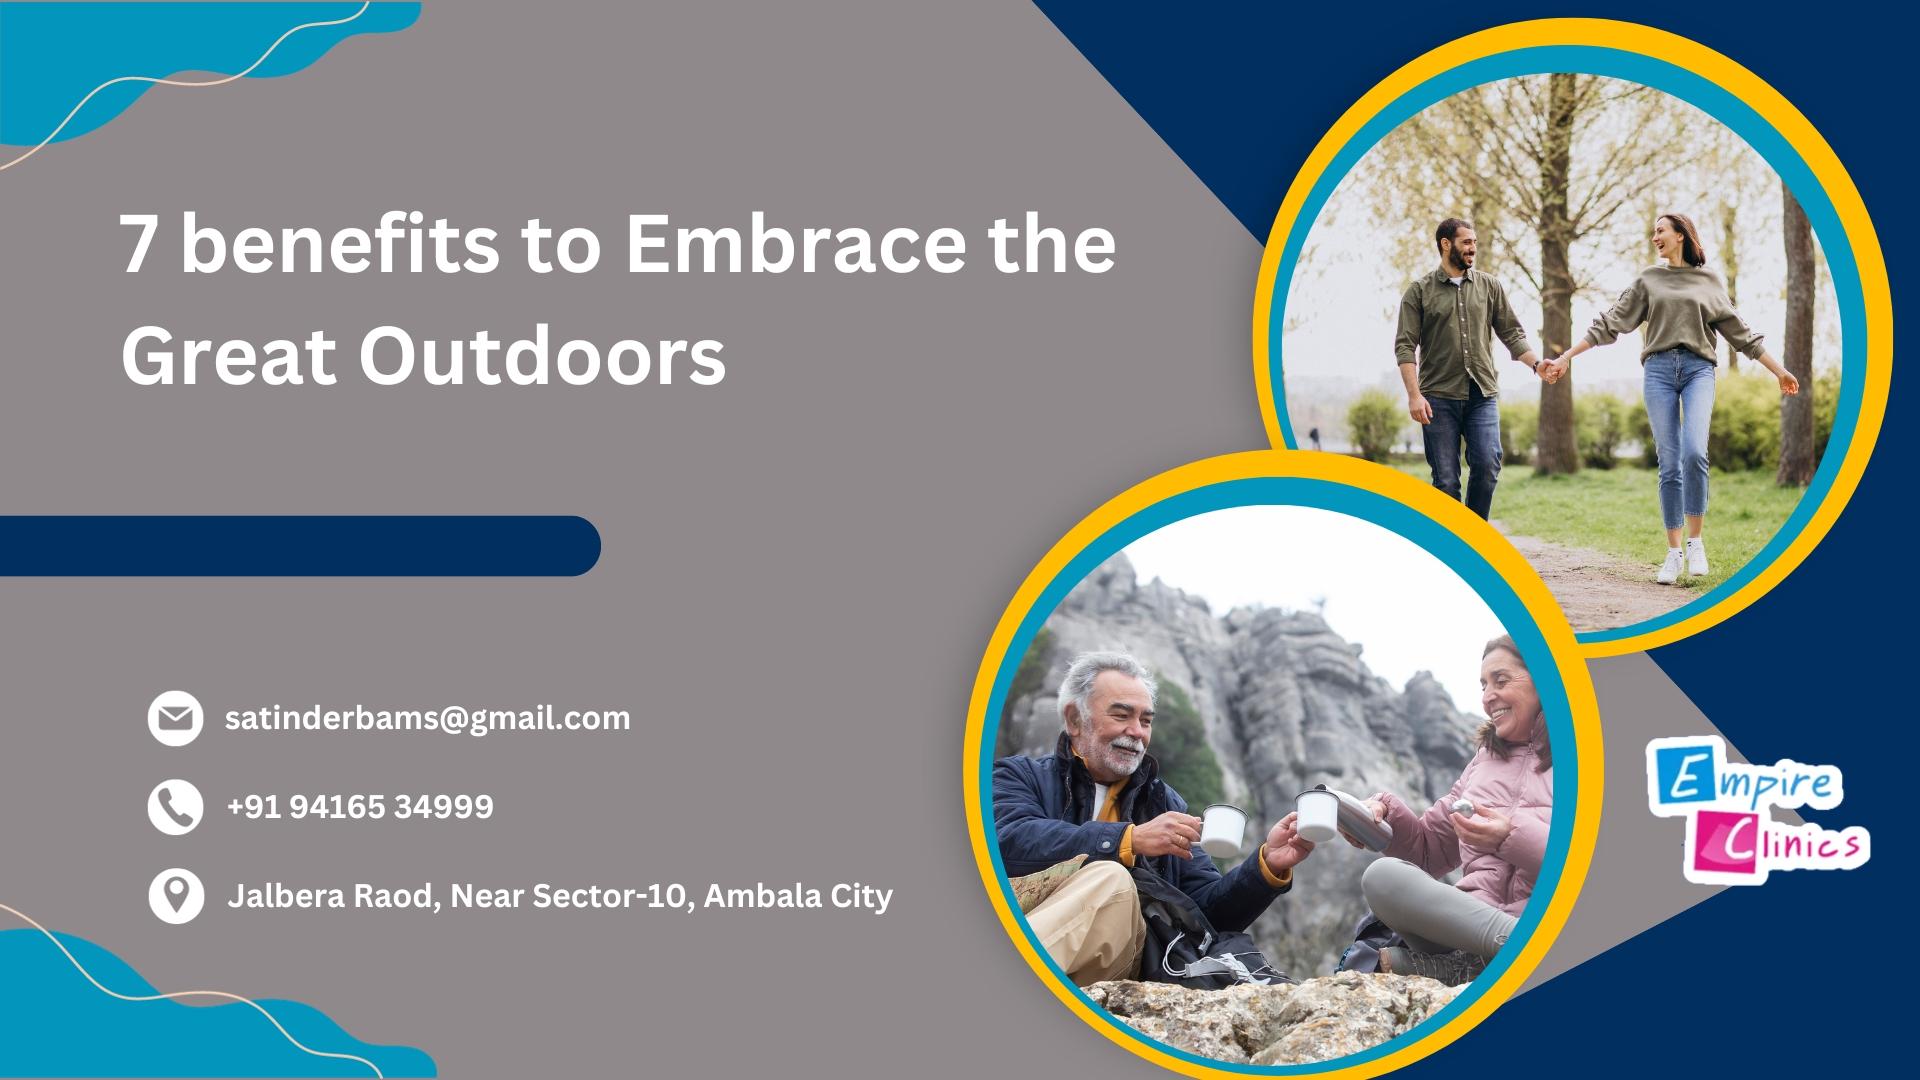 7 benefits of Embrace the Great Outdoors